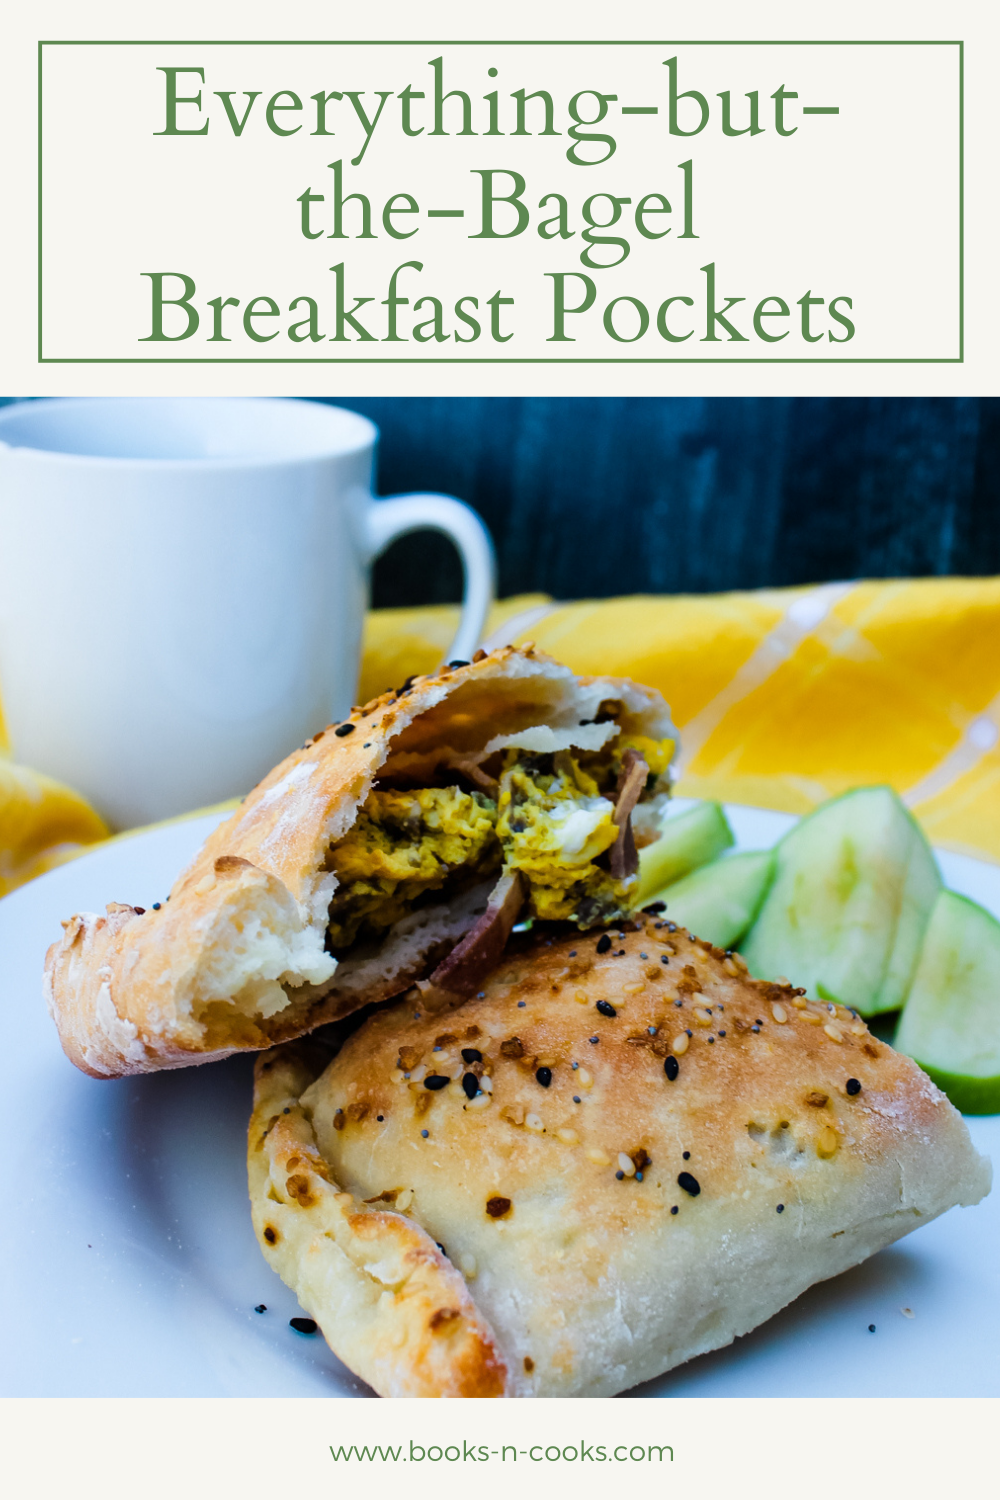 These Everything-but-the-Bagel Breakfast Pockets are a hearty family favorite breakfast. Make them on the weekend with your favorite filling and enjoy for breakfast all week long. 